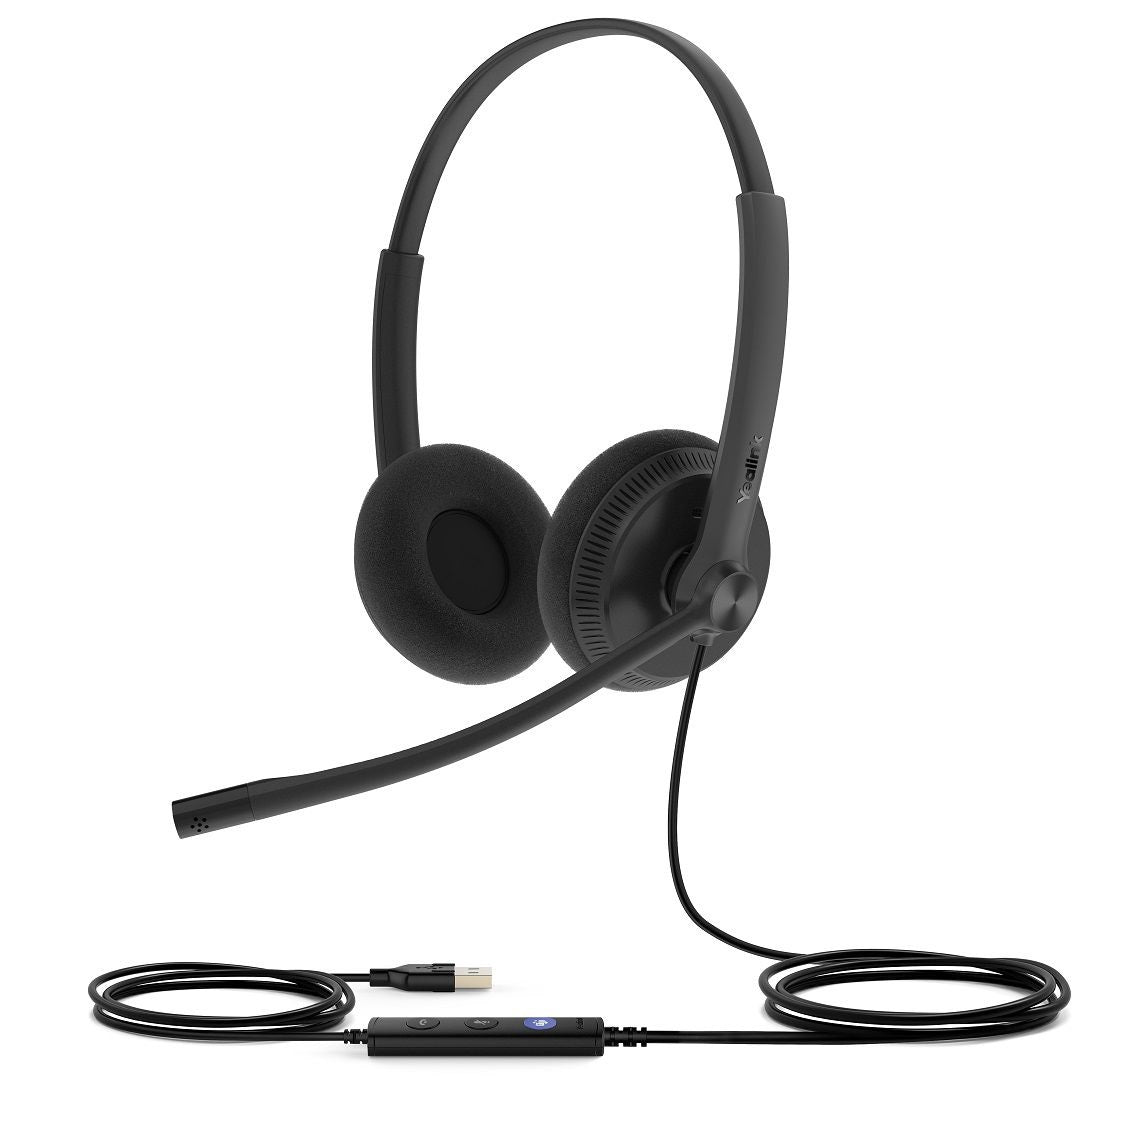 Yealink-UH34-Lite-USB-Headset-Duo-UC-Right-Side